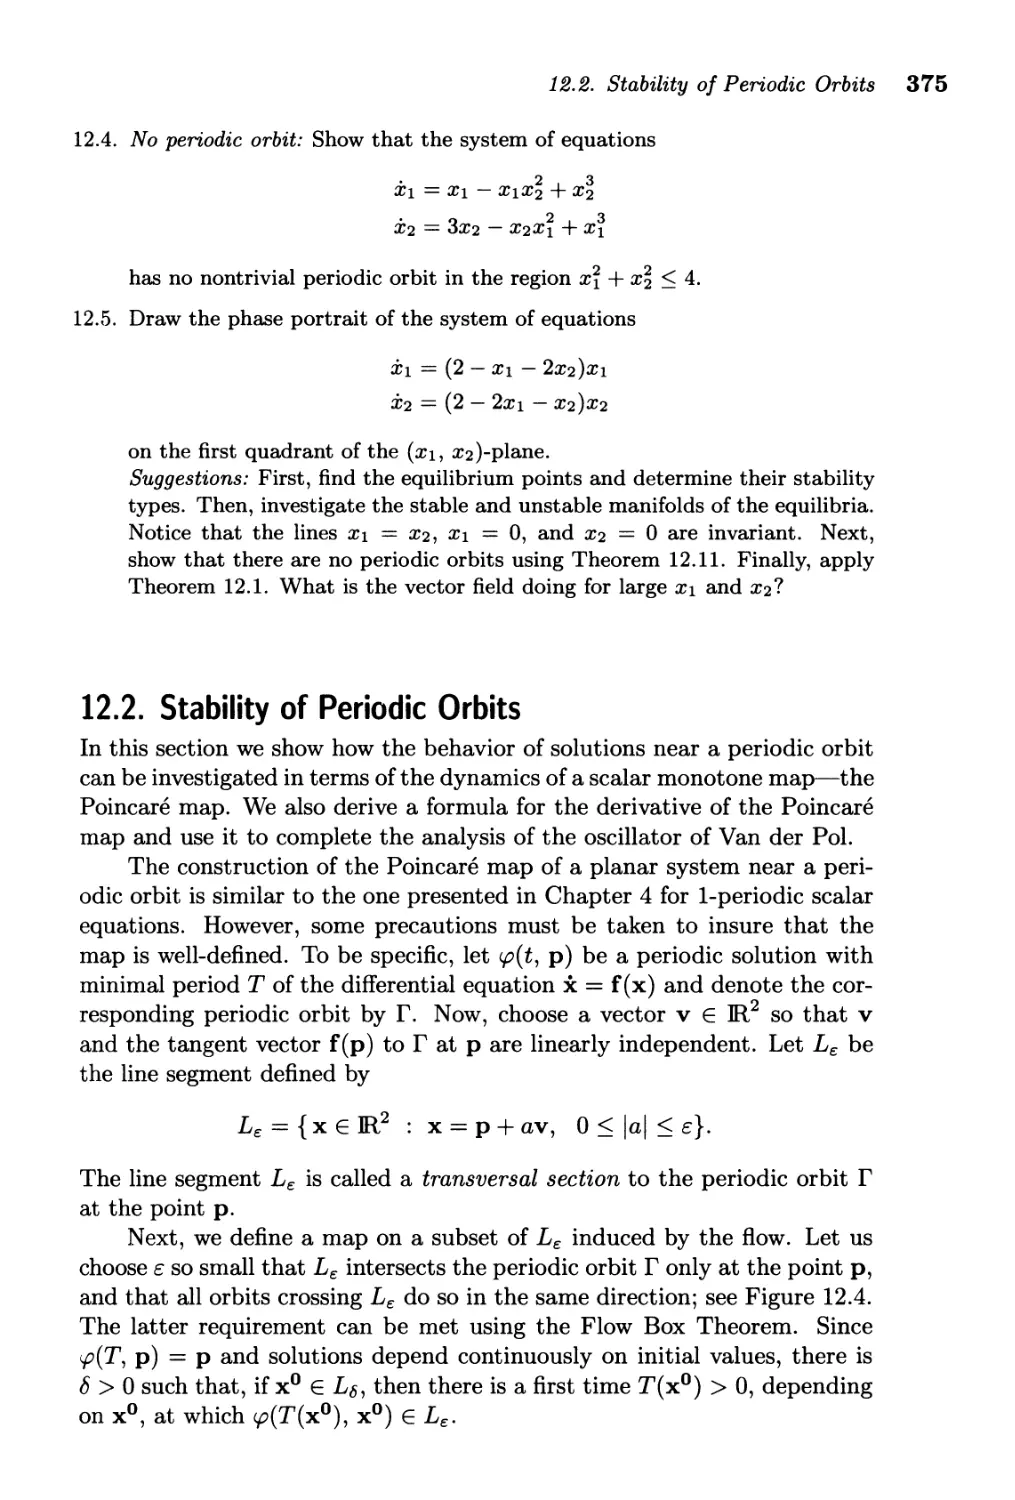 12.2. Stability of Periodic Orbits